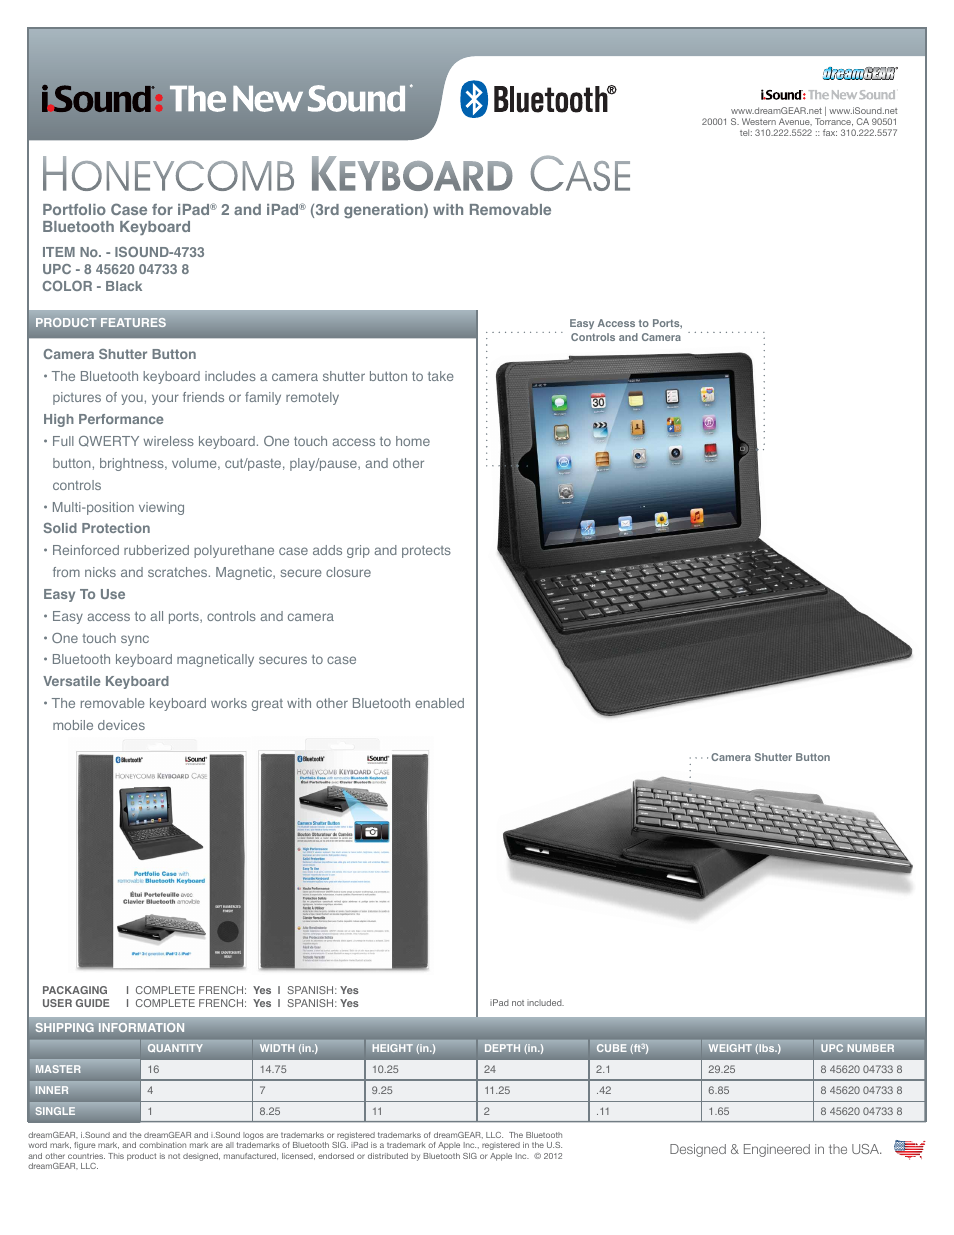 Honeycomb Keyboard Case for iPad2-3-4th gen - Sell Sheet